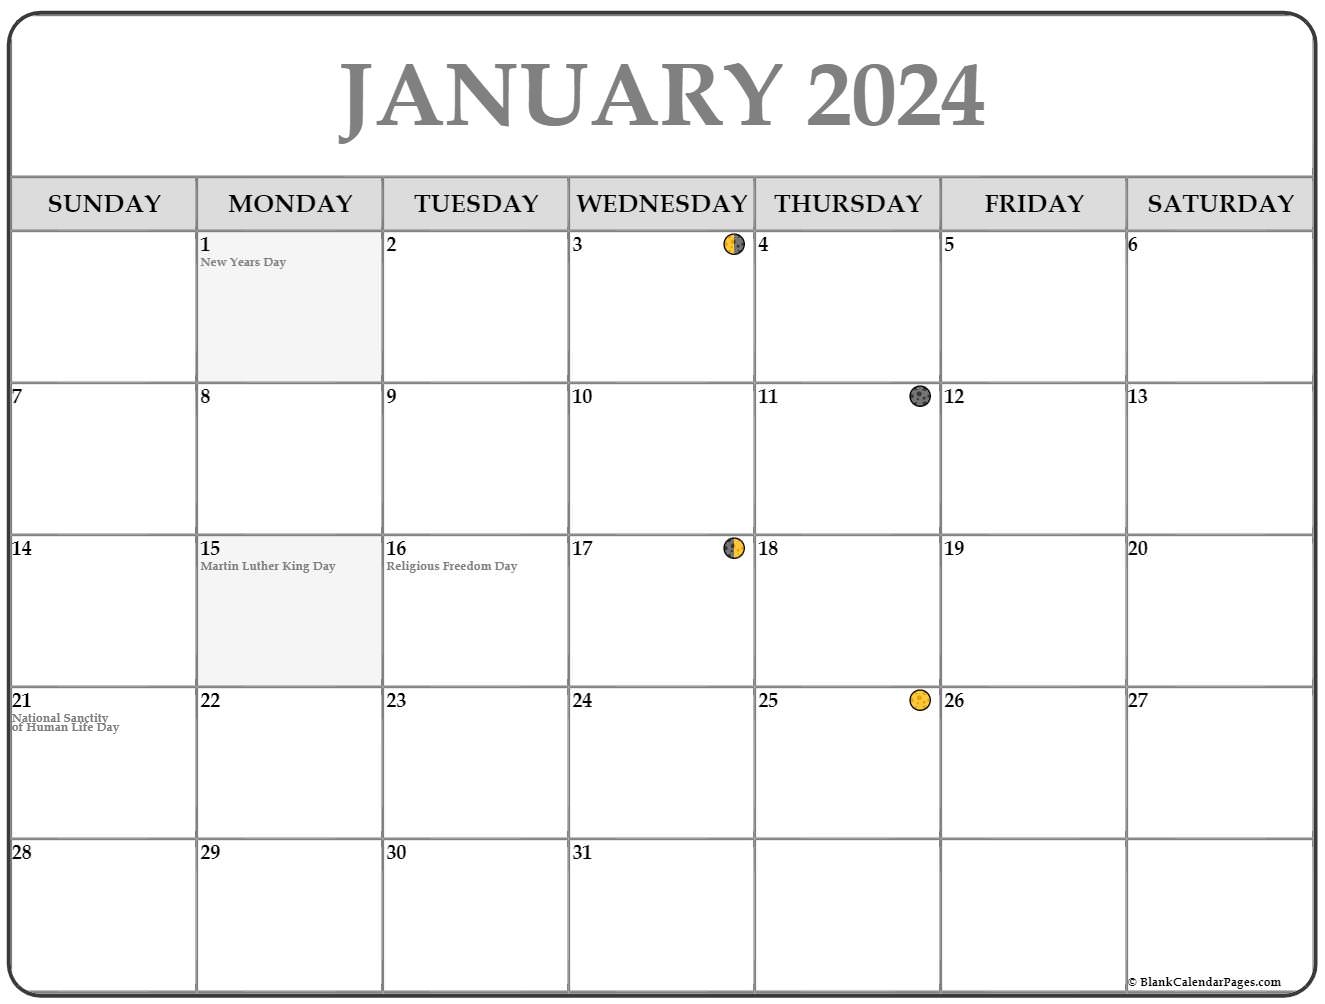 January 2024 Full Moon Calendar Susi Zilvia | Free Printable 2024 Monthly Calendar With Holidays Moon Phases